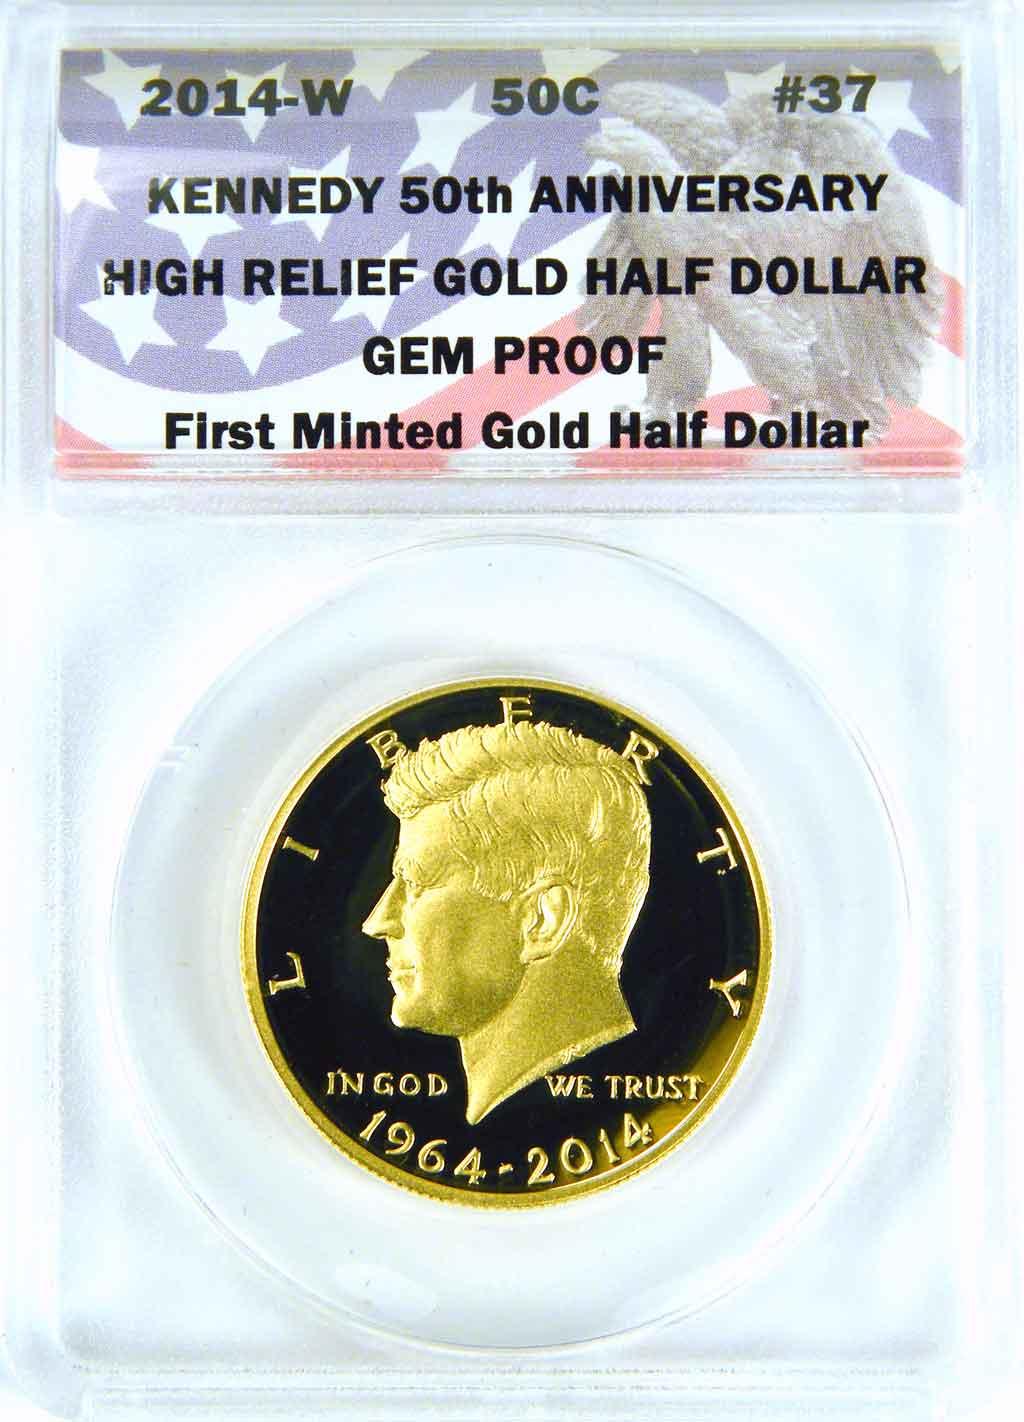 CollecTons Keepers #37: 2014-W Kennedy Half Dollar GOLD Coin Certified in Exclusive ANACS GEM Proof Holder